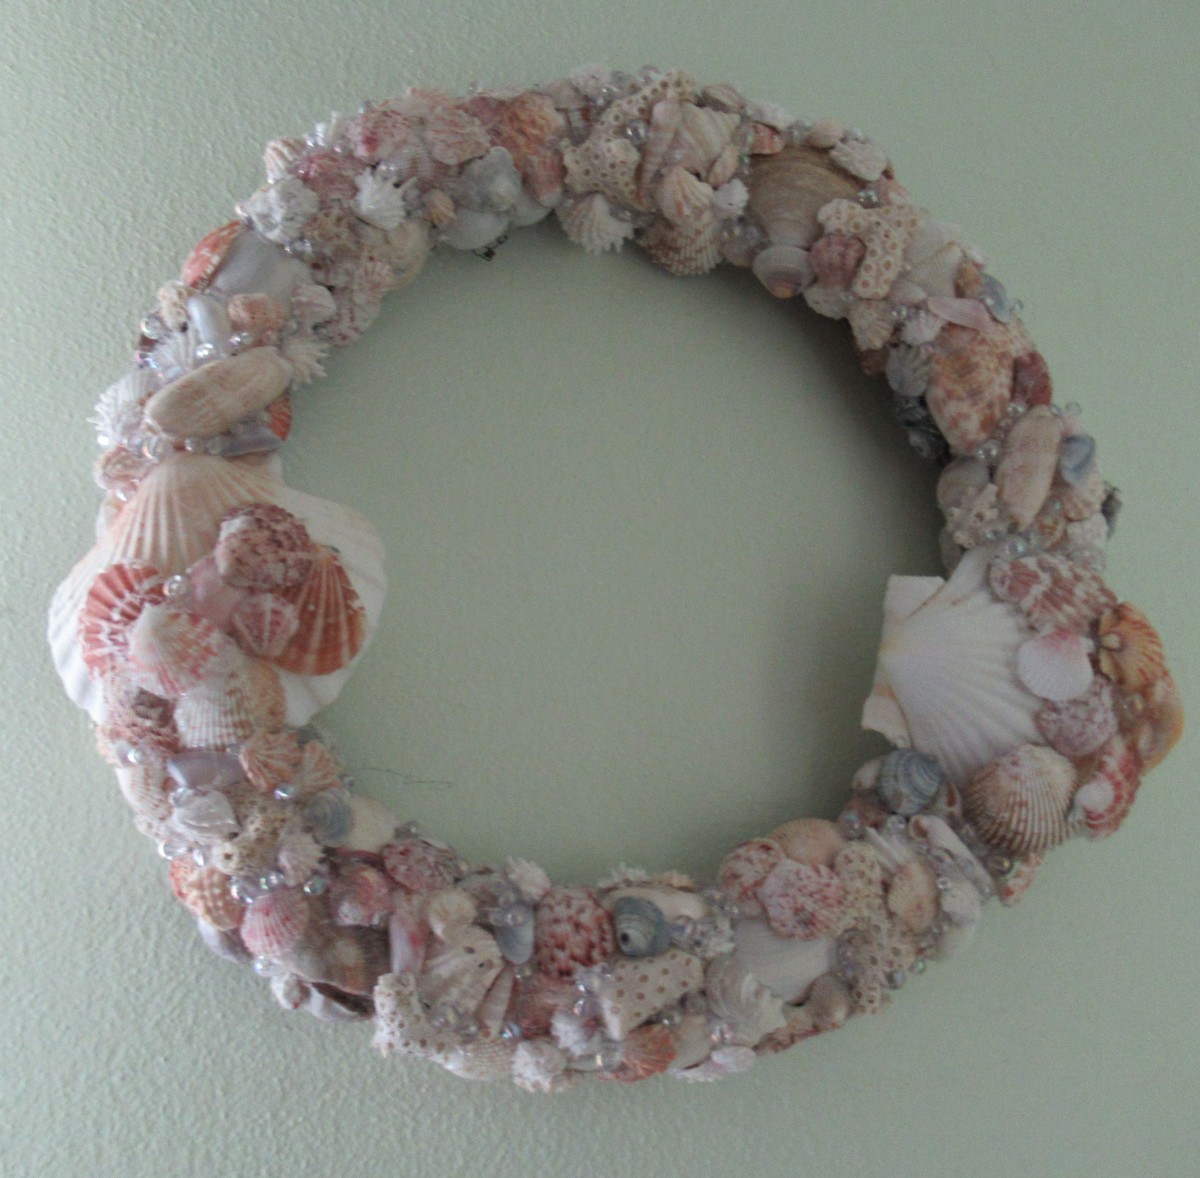 Displaying your shell collections on wreaths is a way to keep those beach memories alive